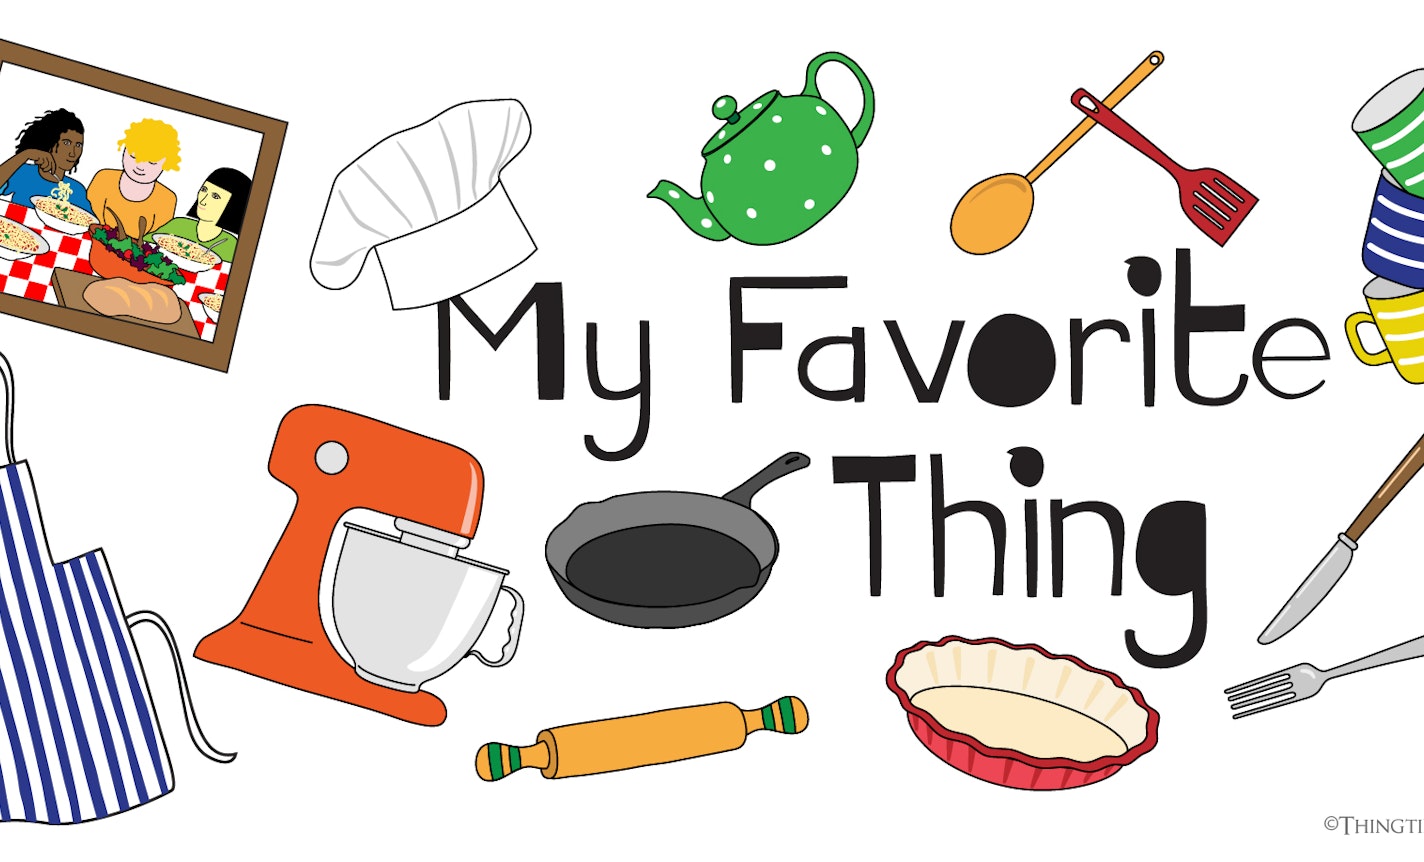 Show & Tale: My Favorite Thing (Kitchen Edition)